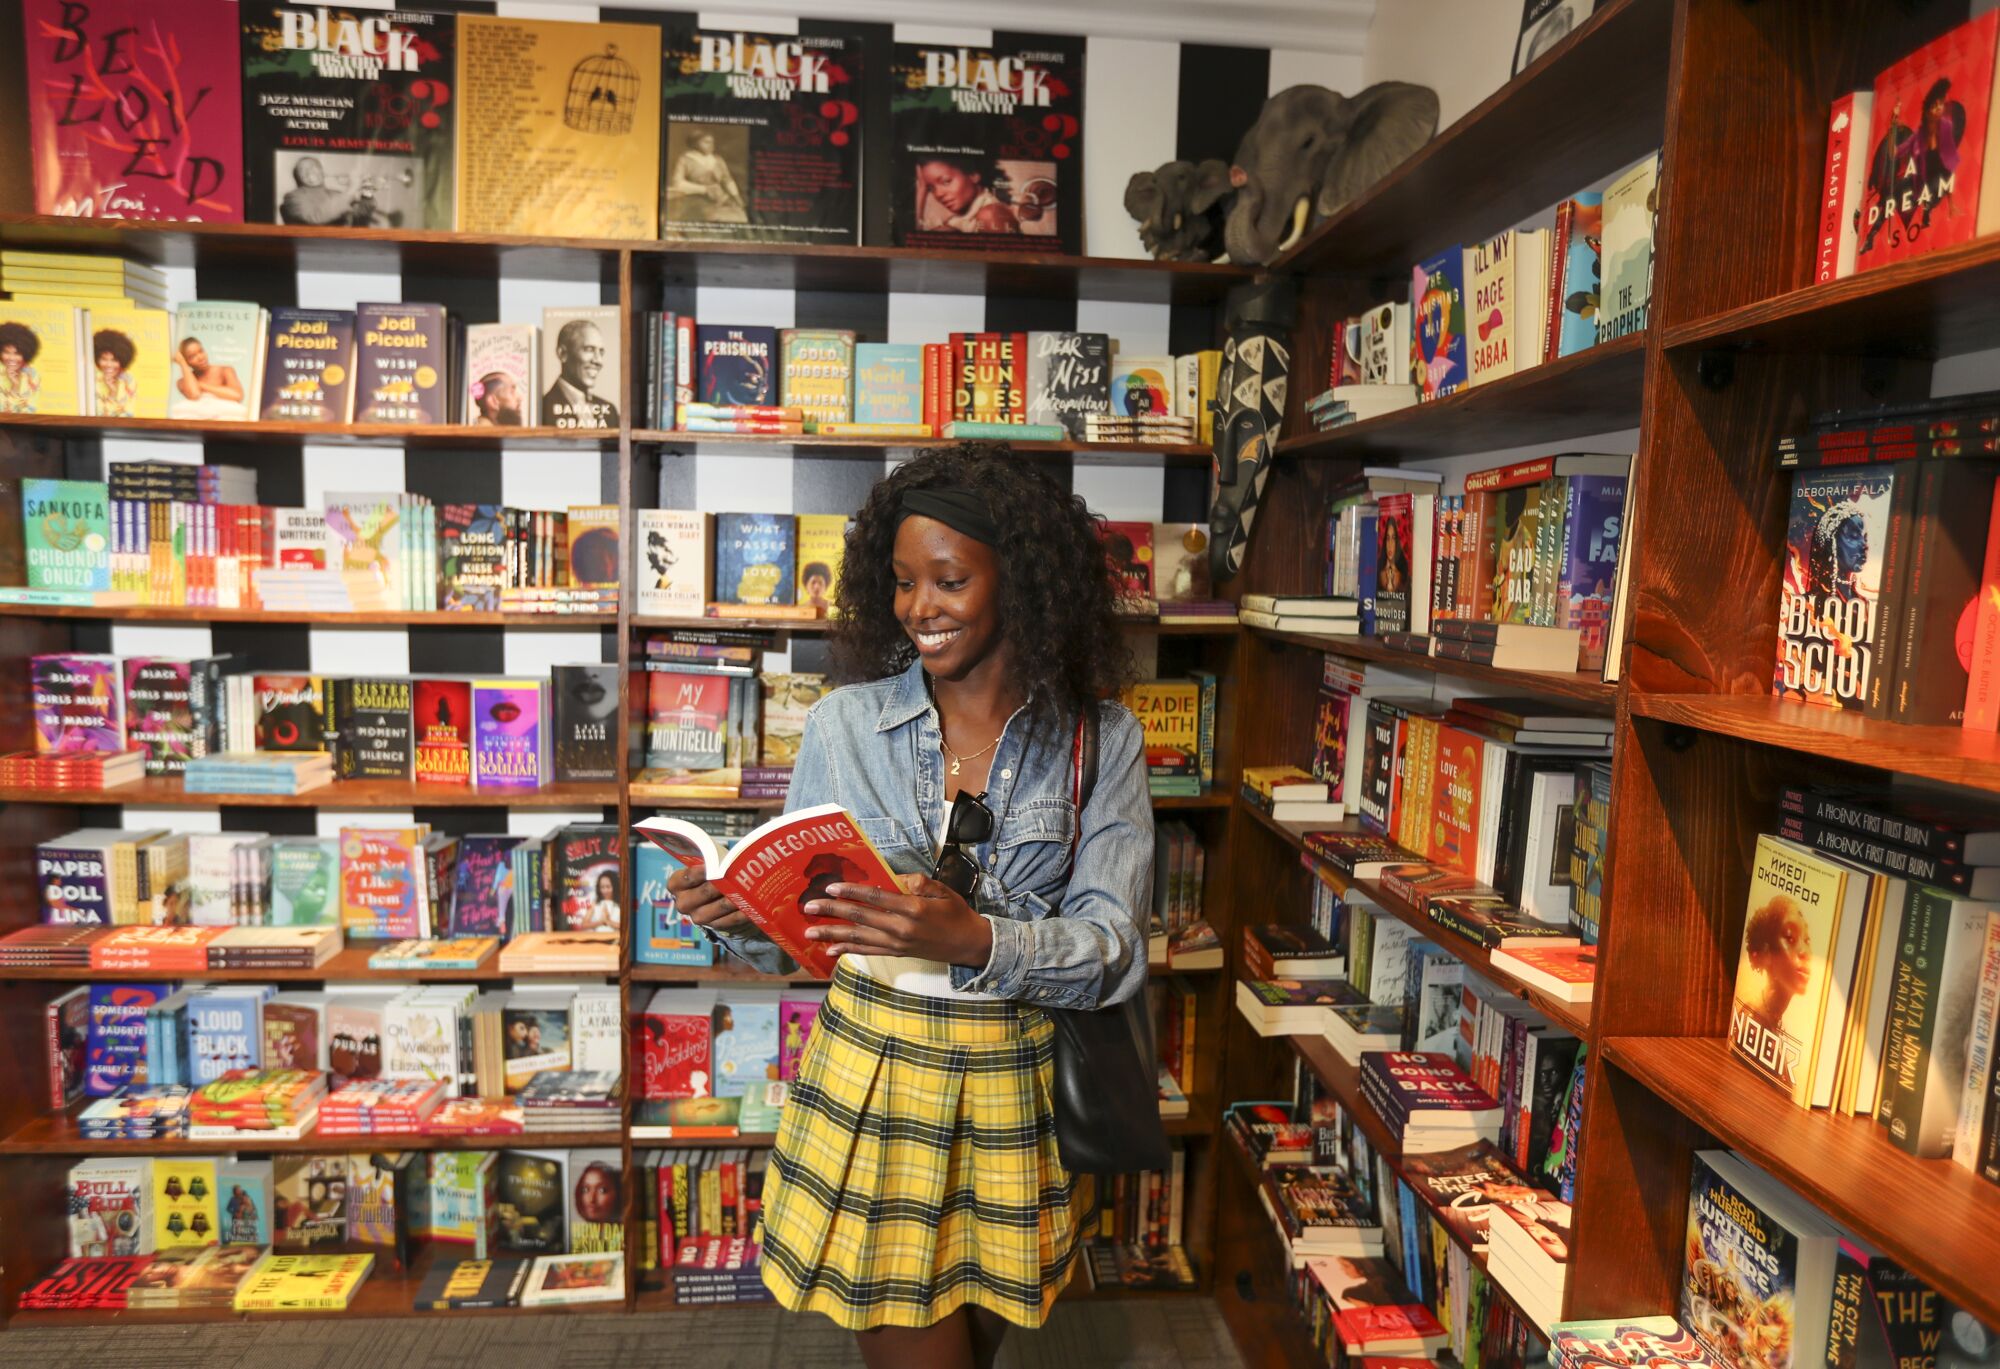 A woman with curly black hair reading a red book in front of a bookshelf.